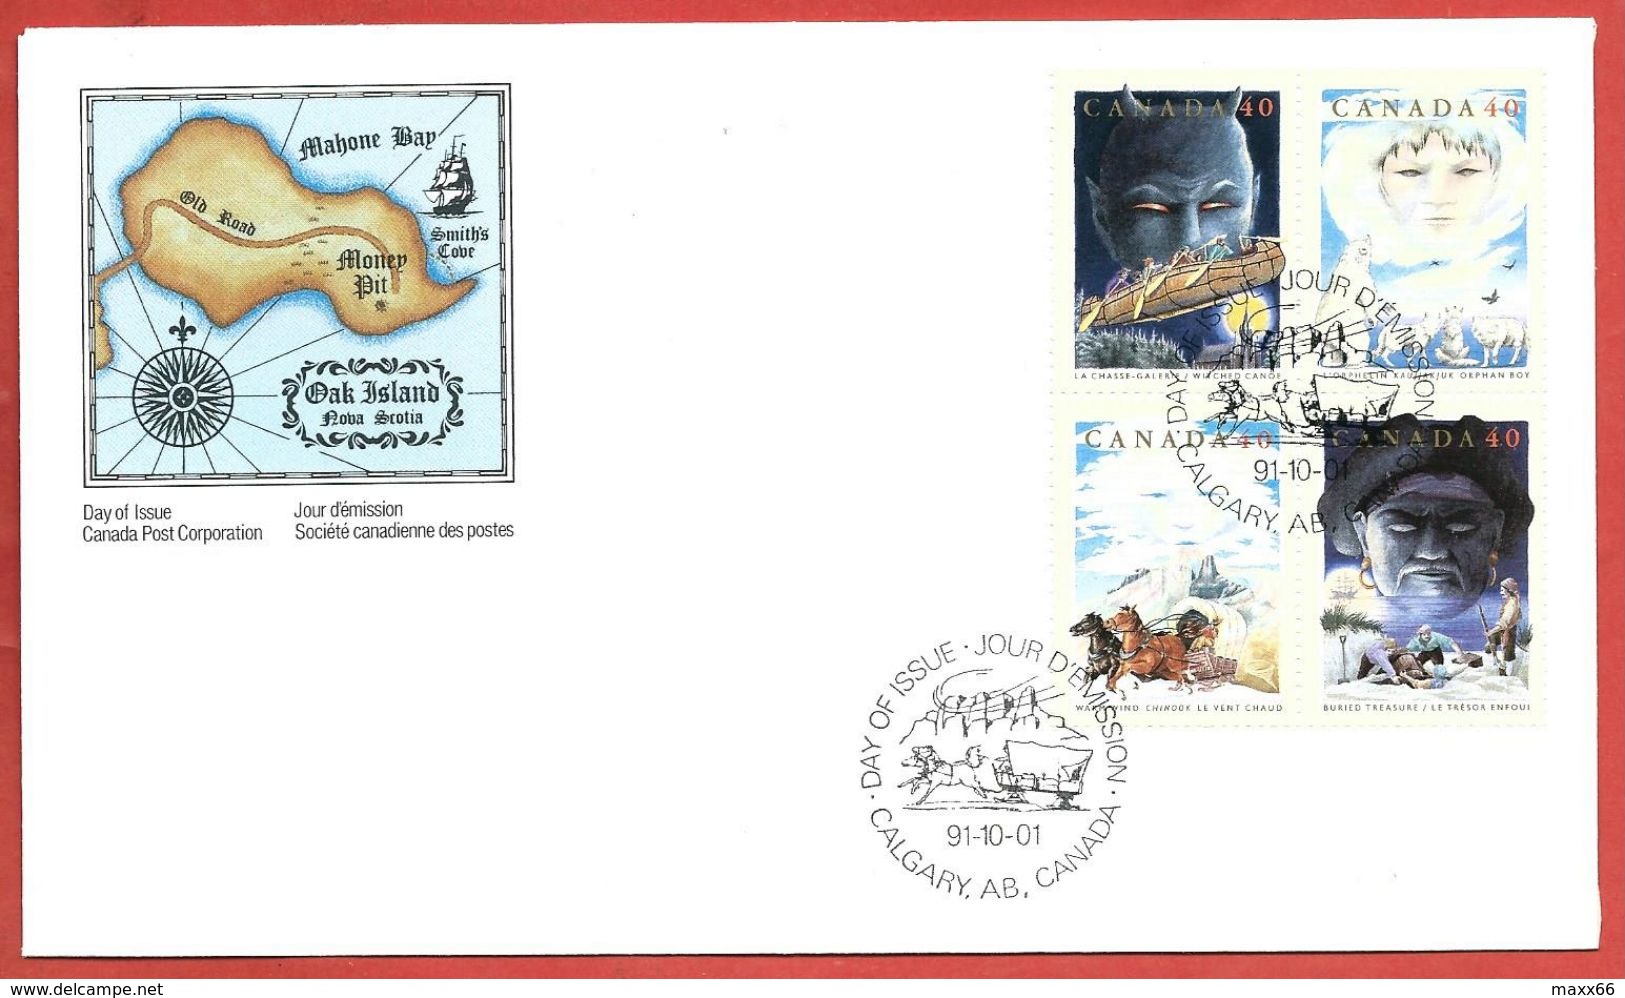 CANADA PRESENTATION PACK FDC - 1991 FOLKTALES - Contes Populaires - With FDC - FOLDER - Enveloppes Commémoratives